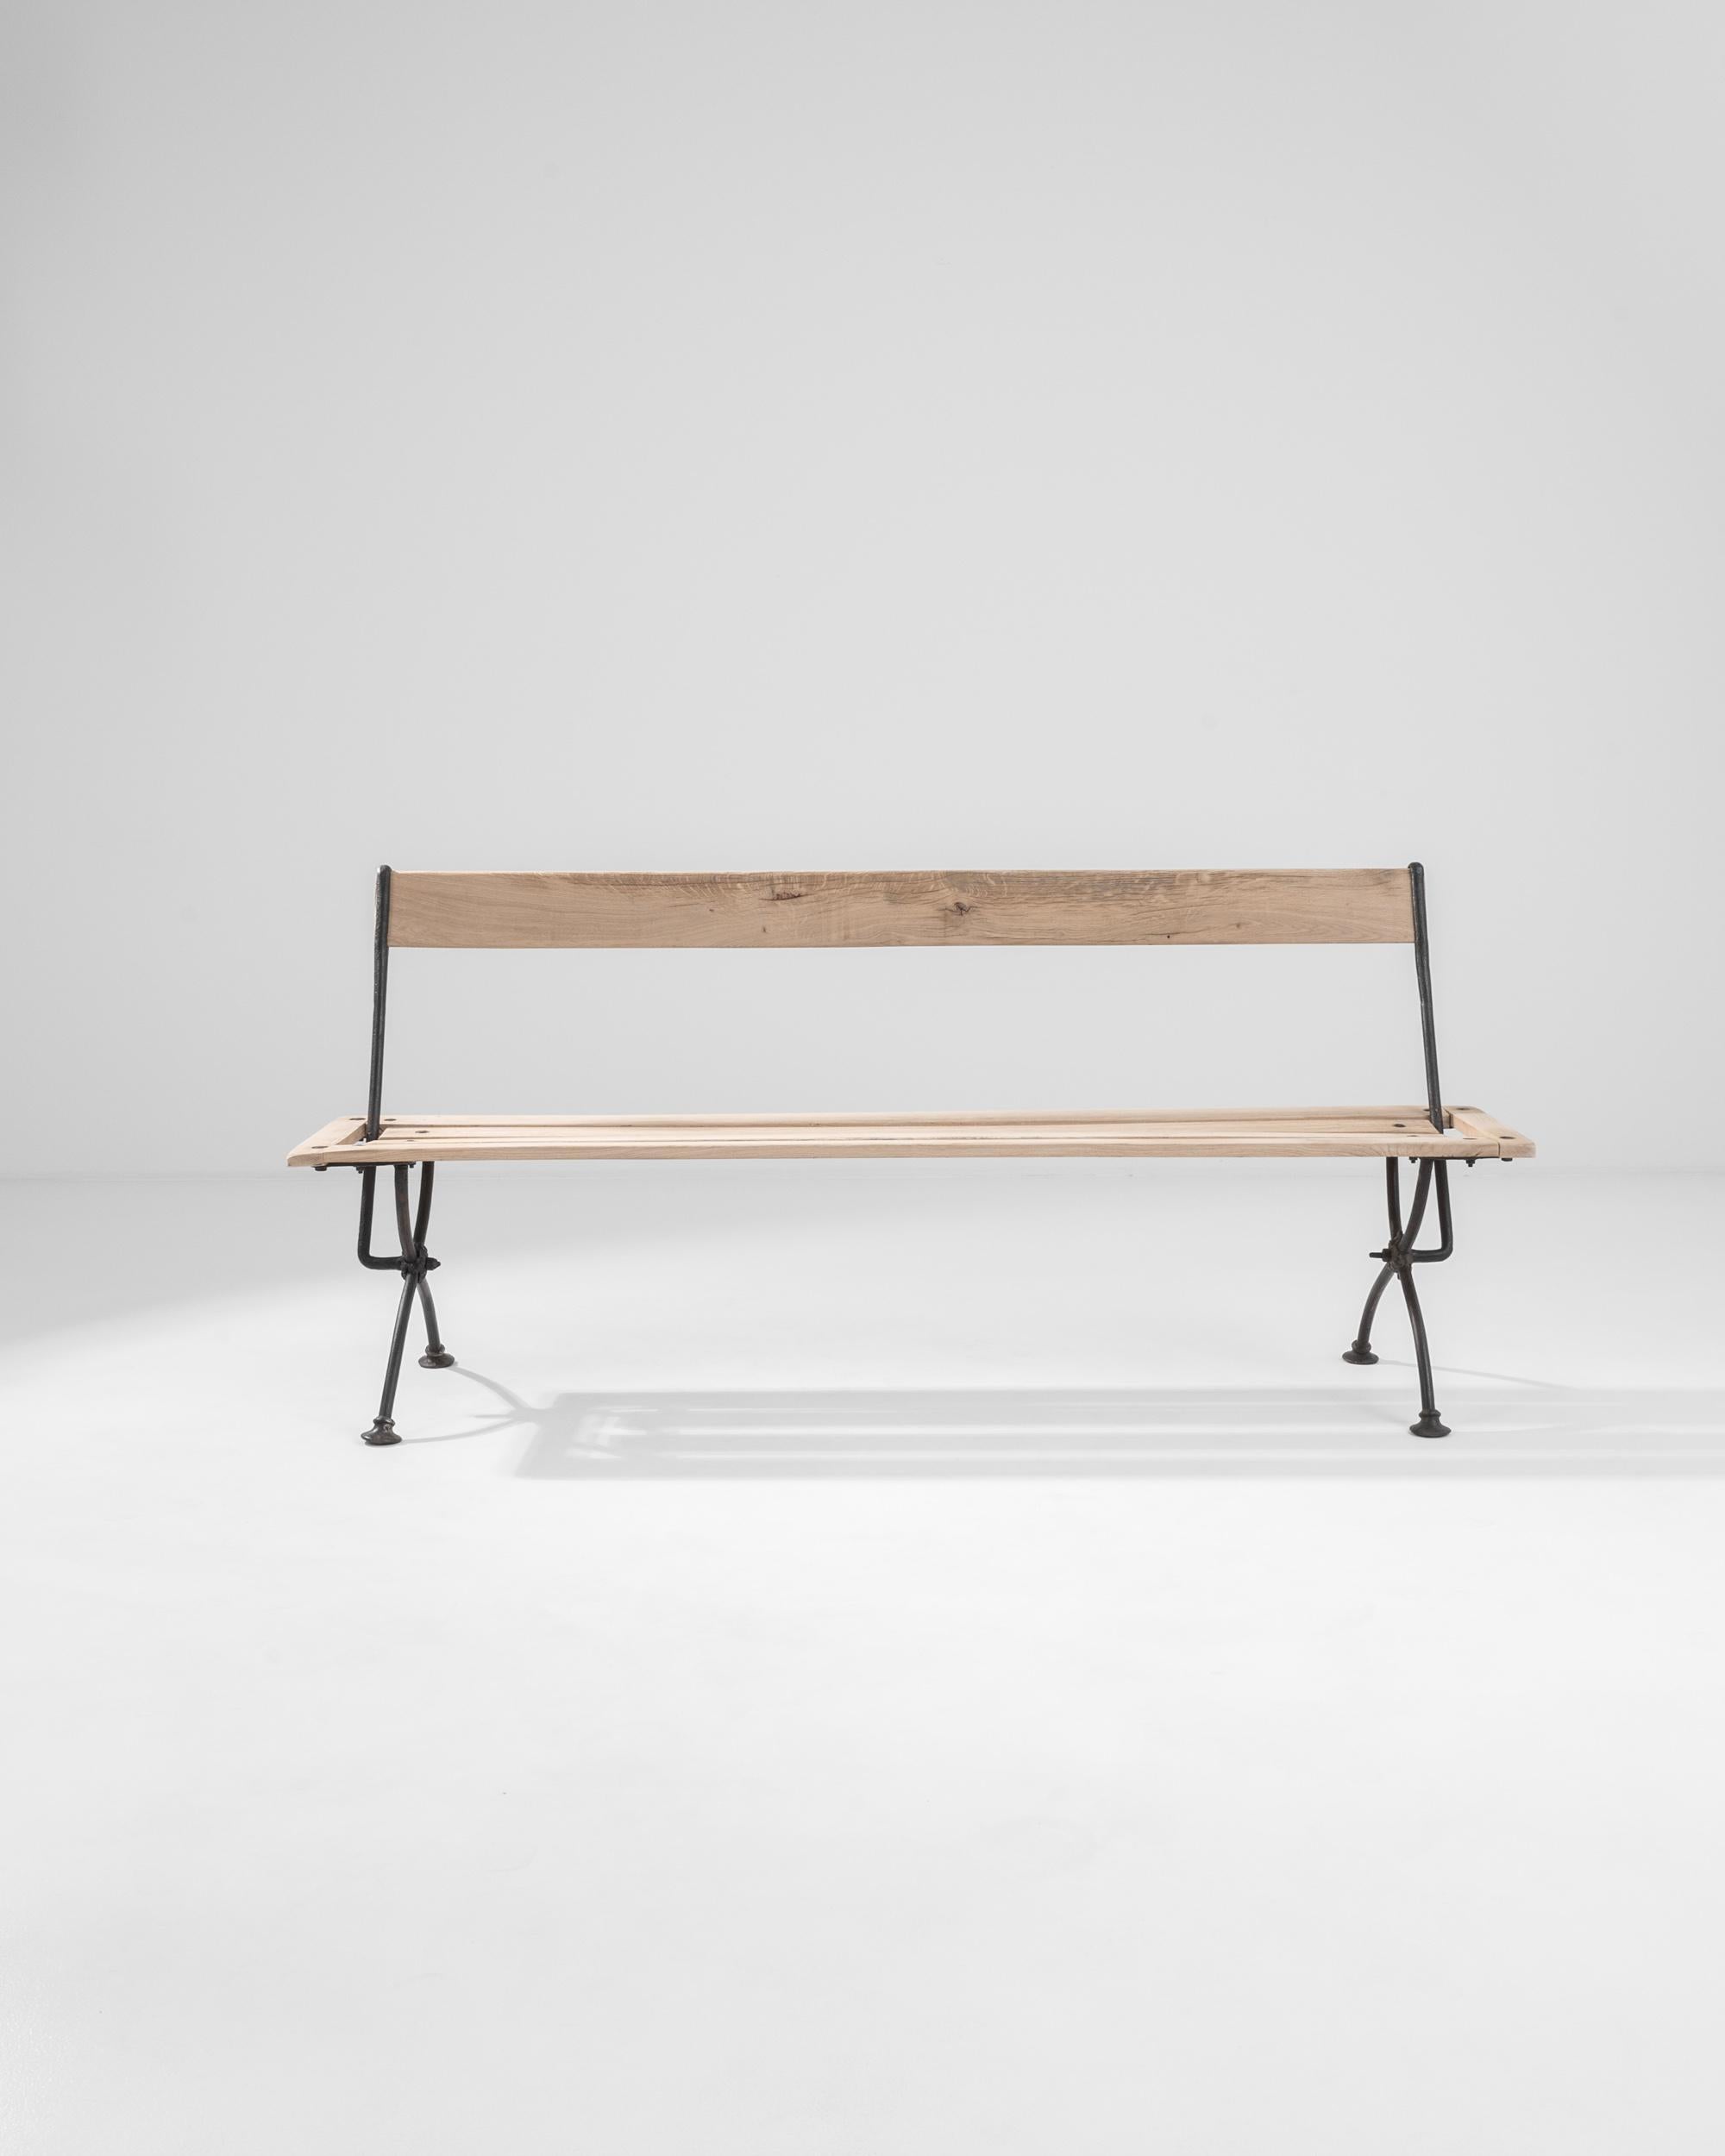 A novel design defines his intriguing rustic piece from France circa 1900. This charming bench, in oak and wrought iron, beams with rustic and mechanical appeal– toggling its orientation back and forth with a clever adjustable back. Natural wood